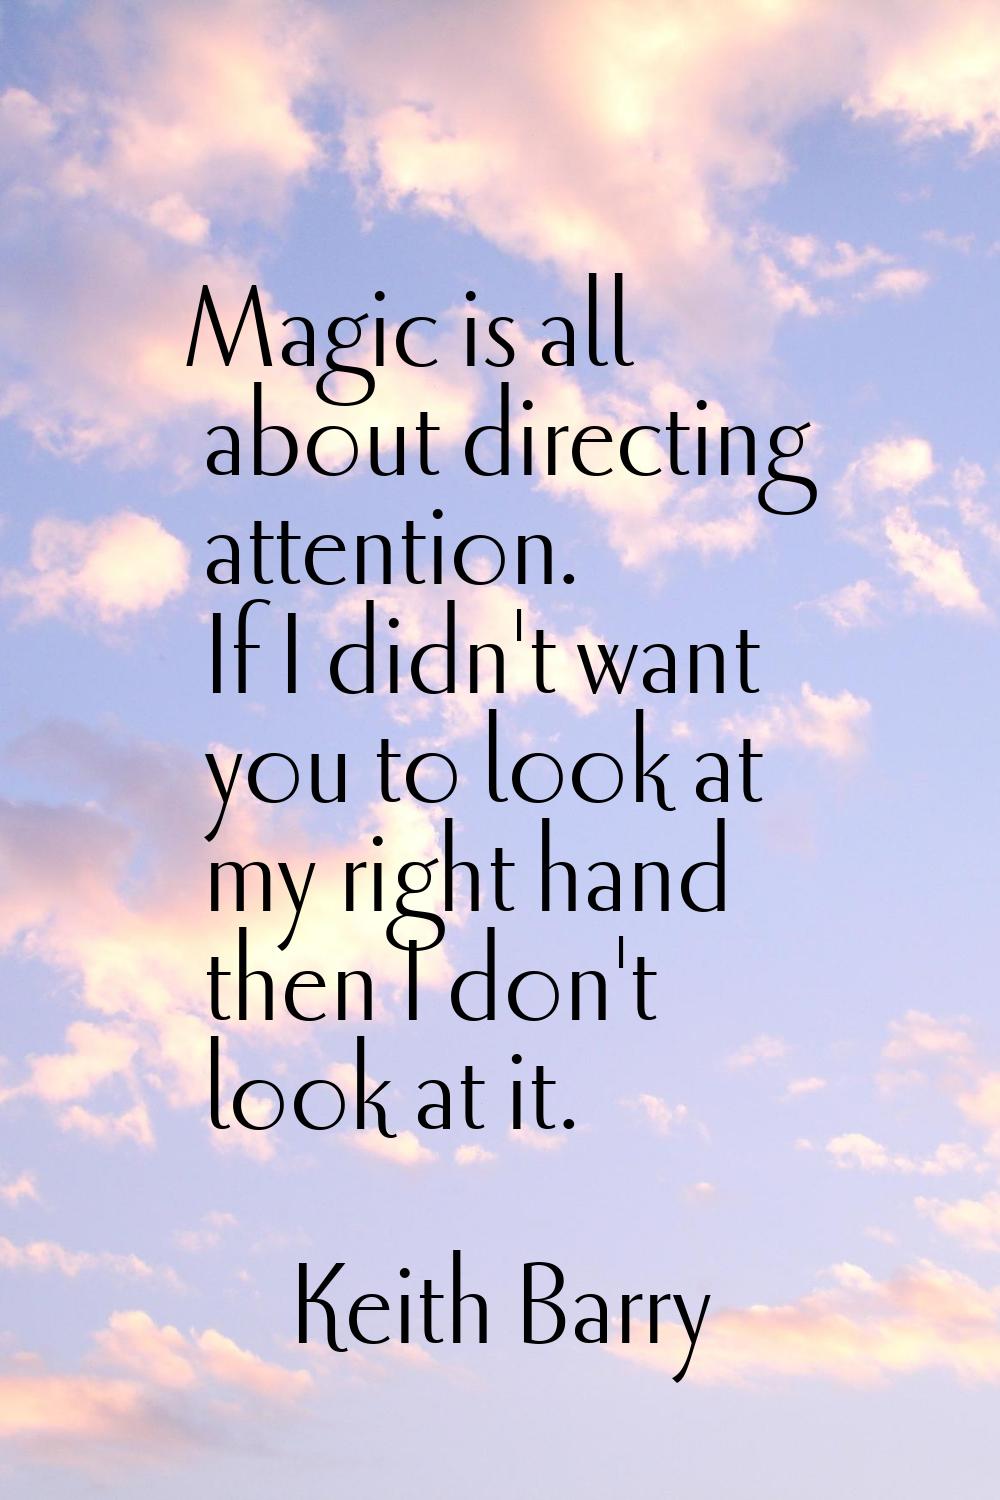 Magic is all about directing attention. If I didn't want you to look at my right hand then I don't 